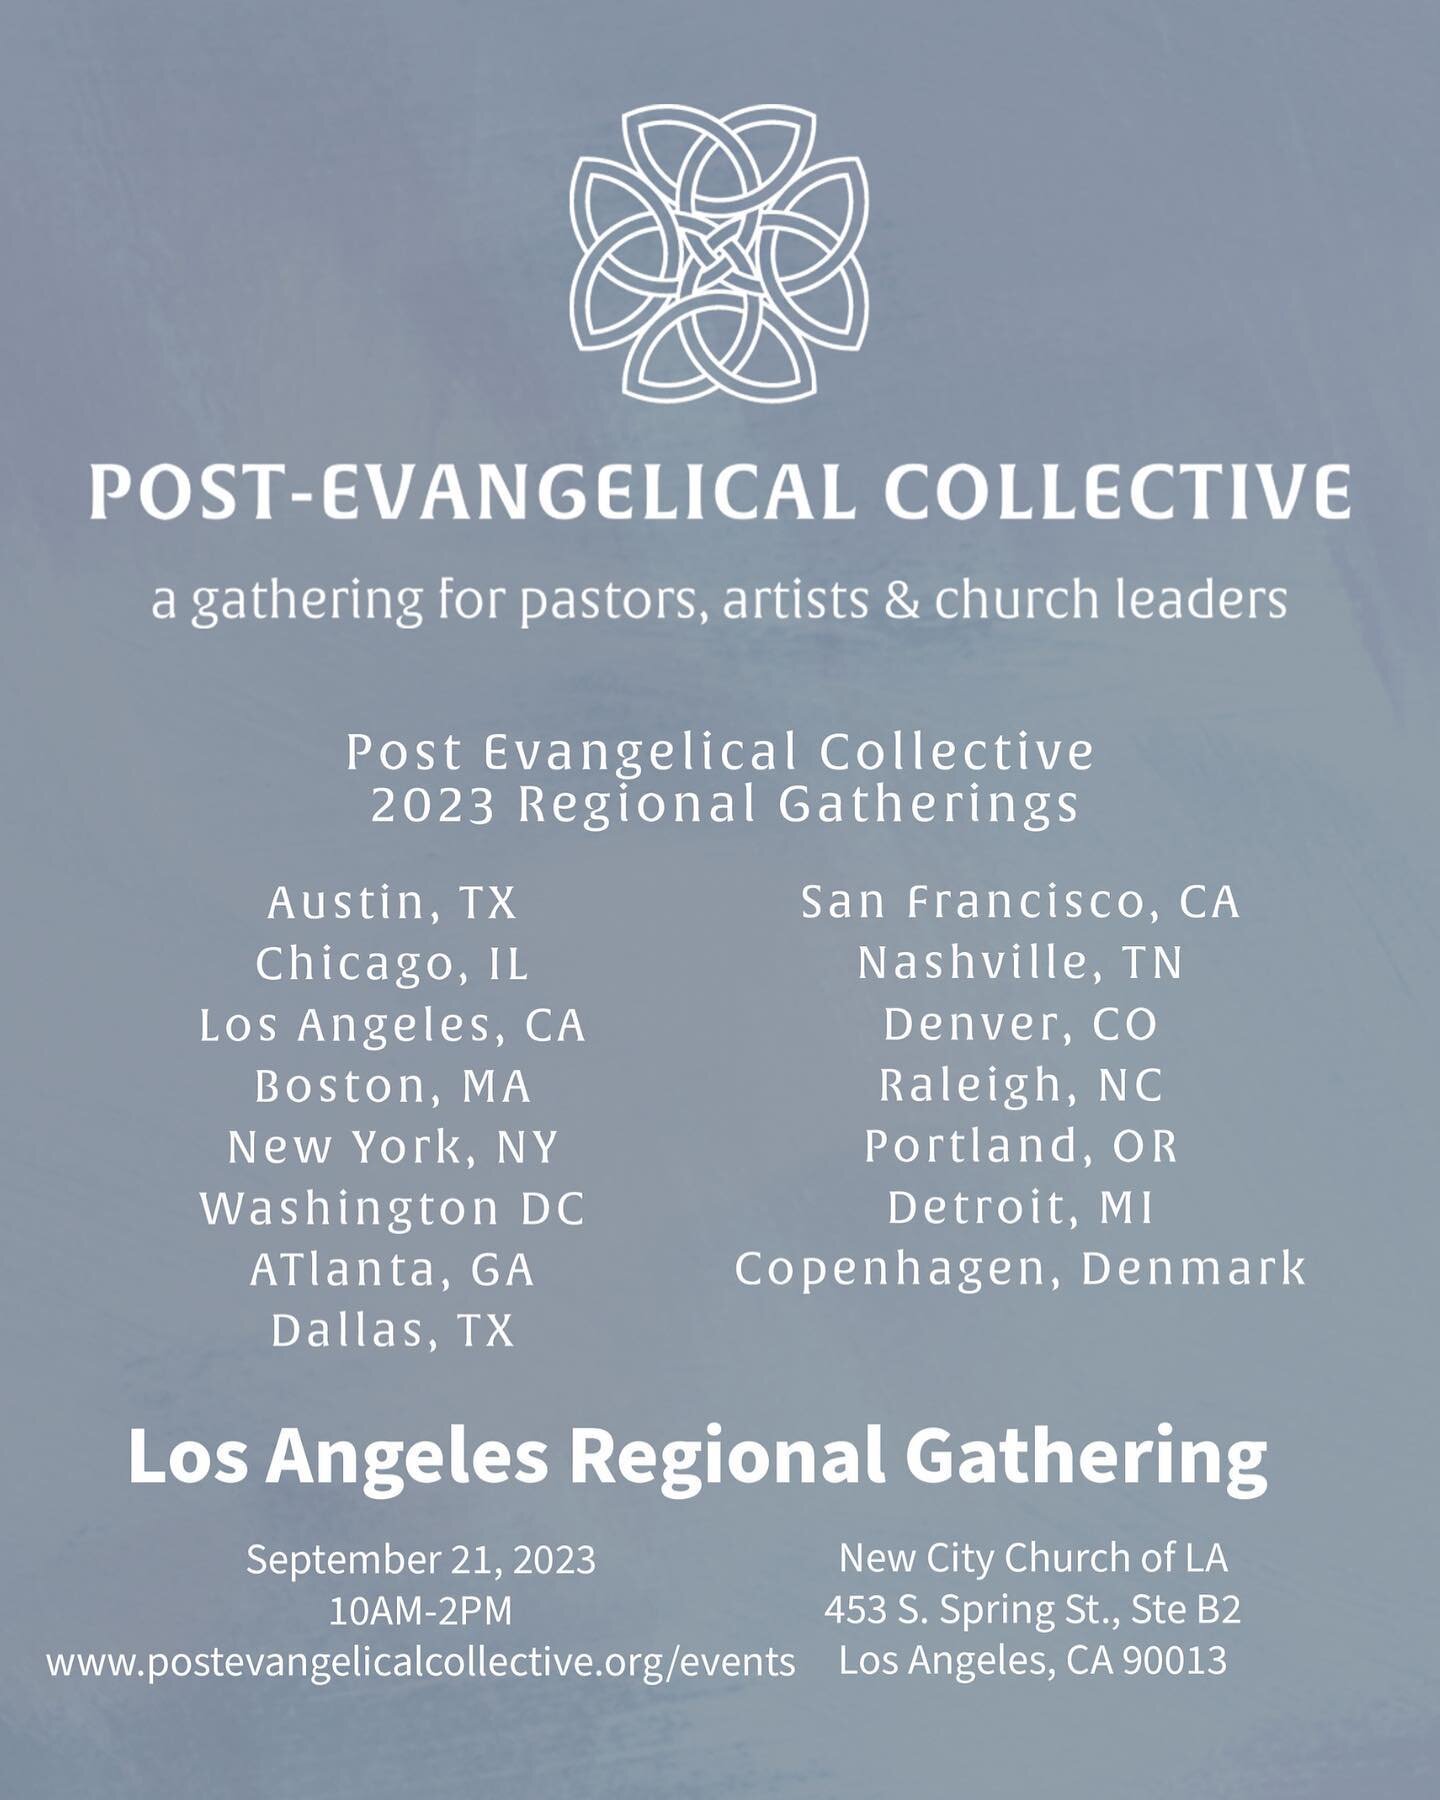 For the last two years, we&rsquo;ve gathered post-evangelical pastors, artists, and other church leaders and stake holders for a national gathering to learn from one another, know we&rsquo;re not alone and to be a part of one of the things the Spirit